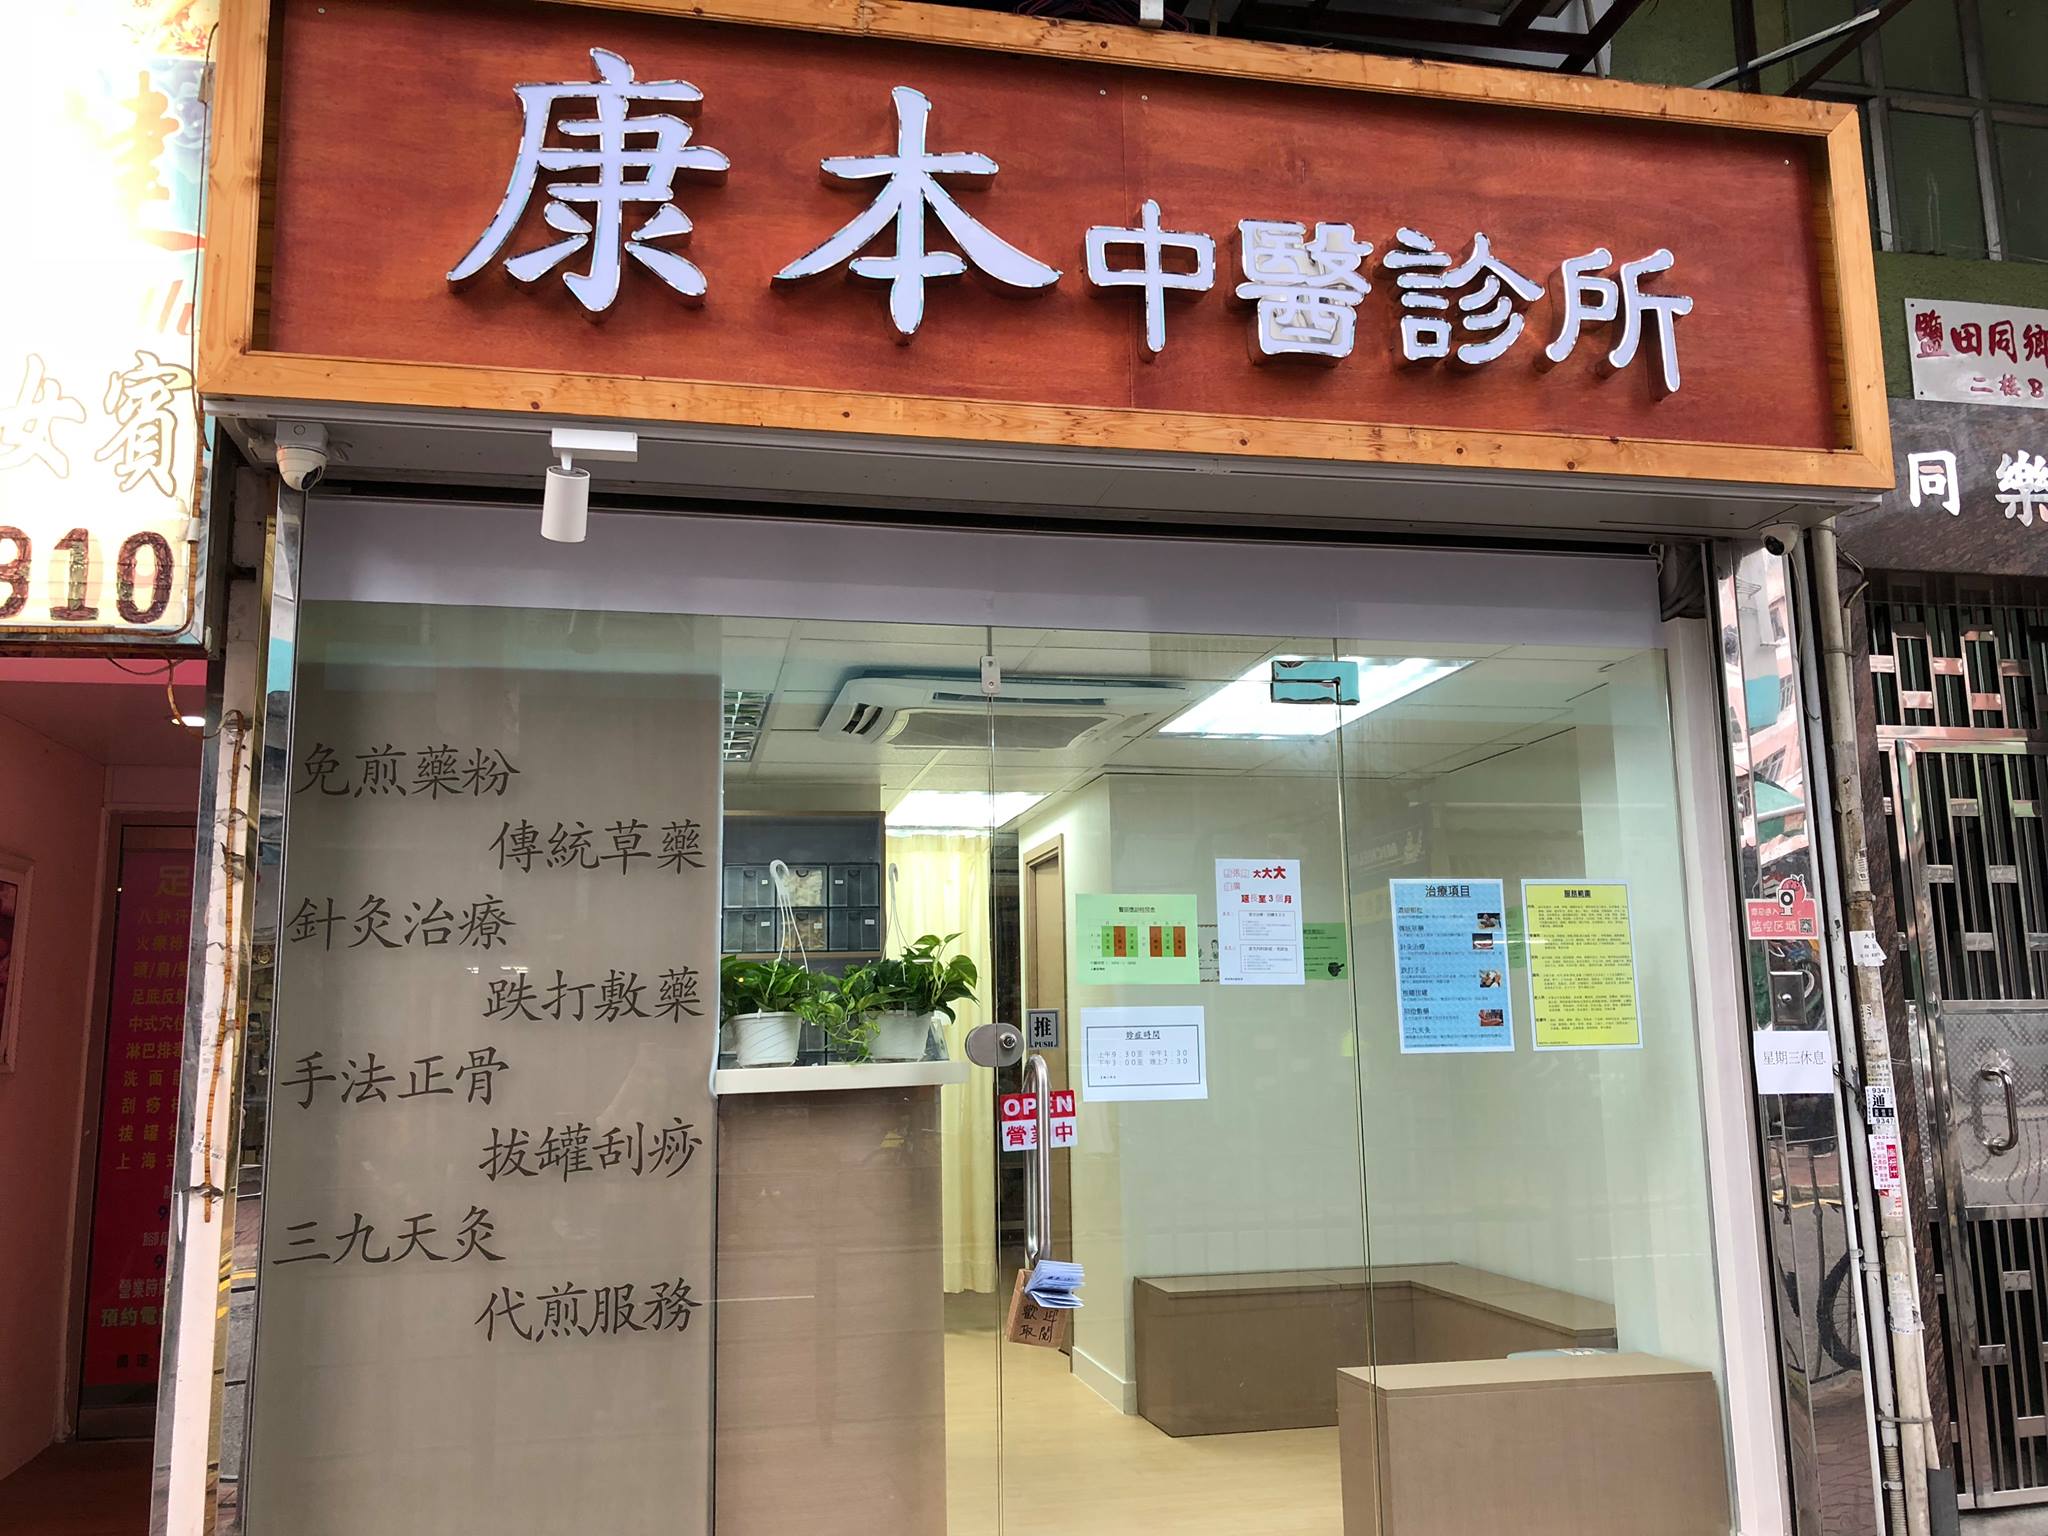 Traditional Chinese Medicine Clinic: 康本中醫診所